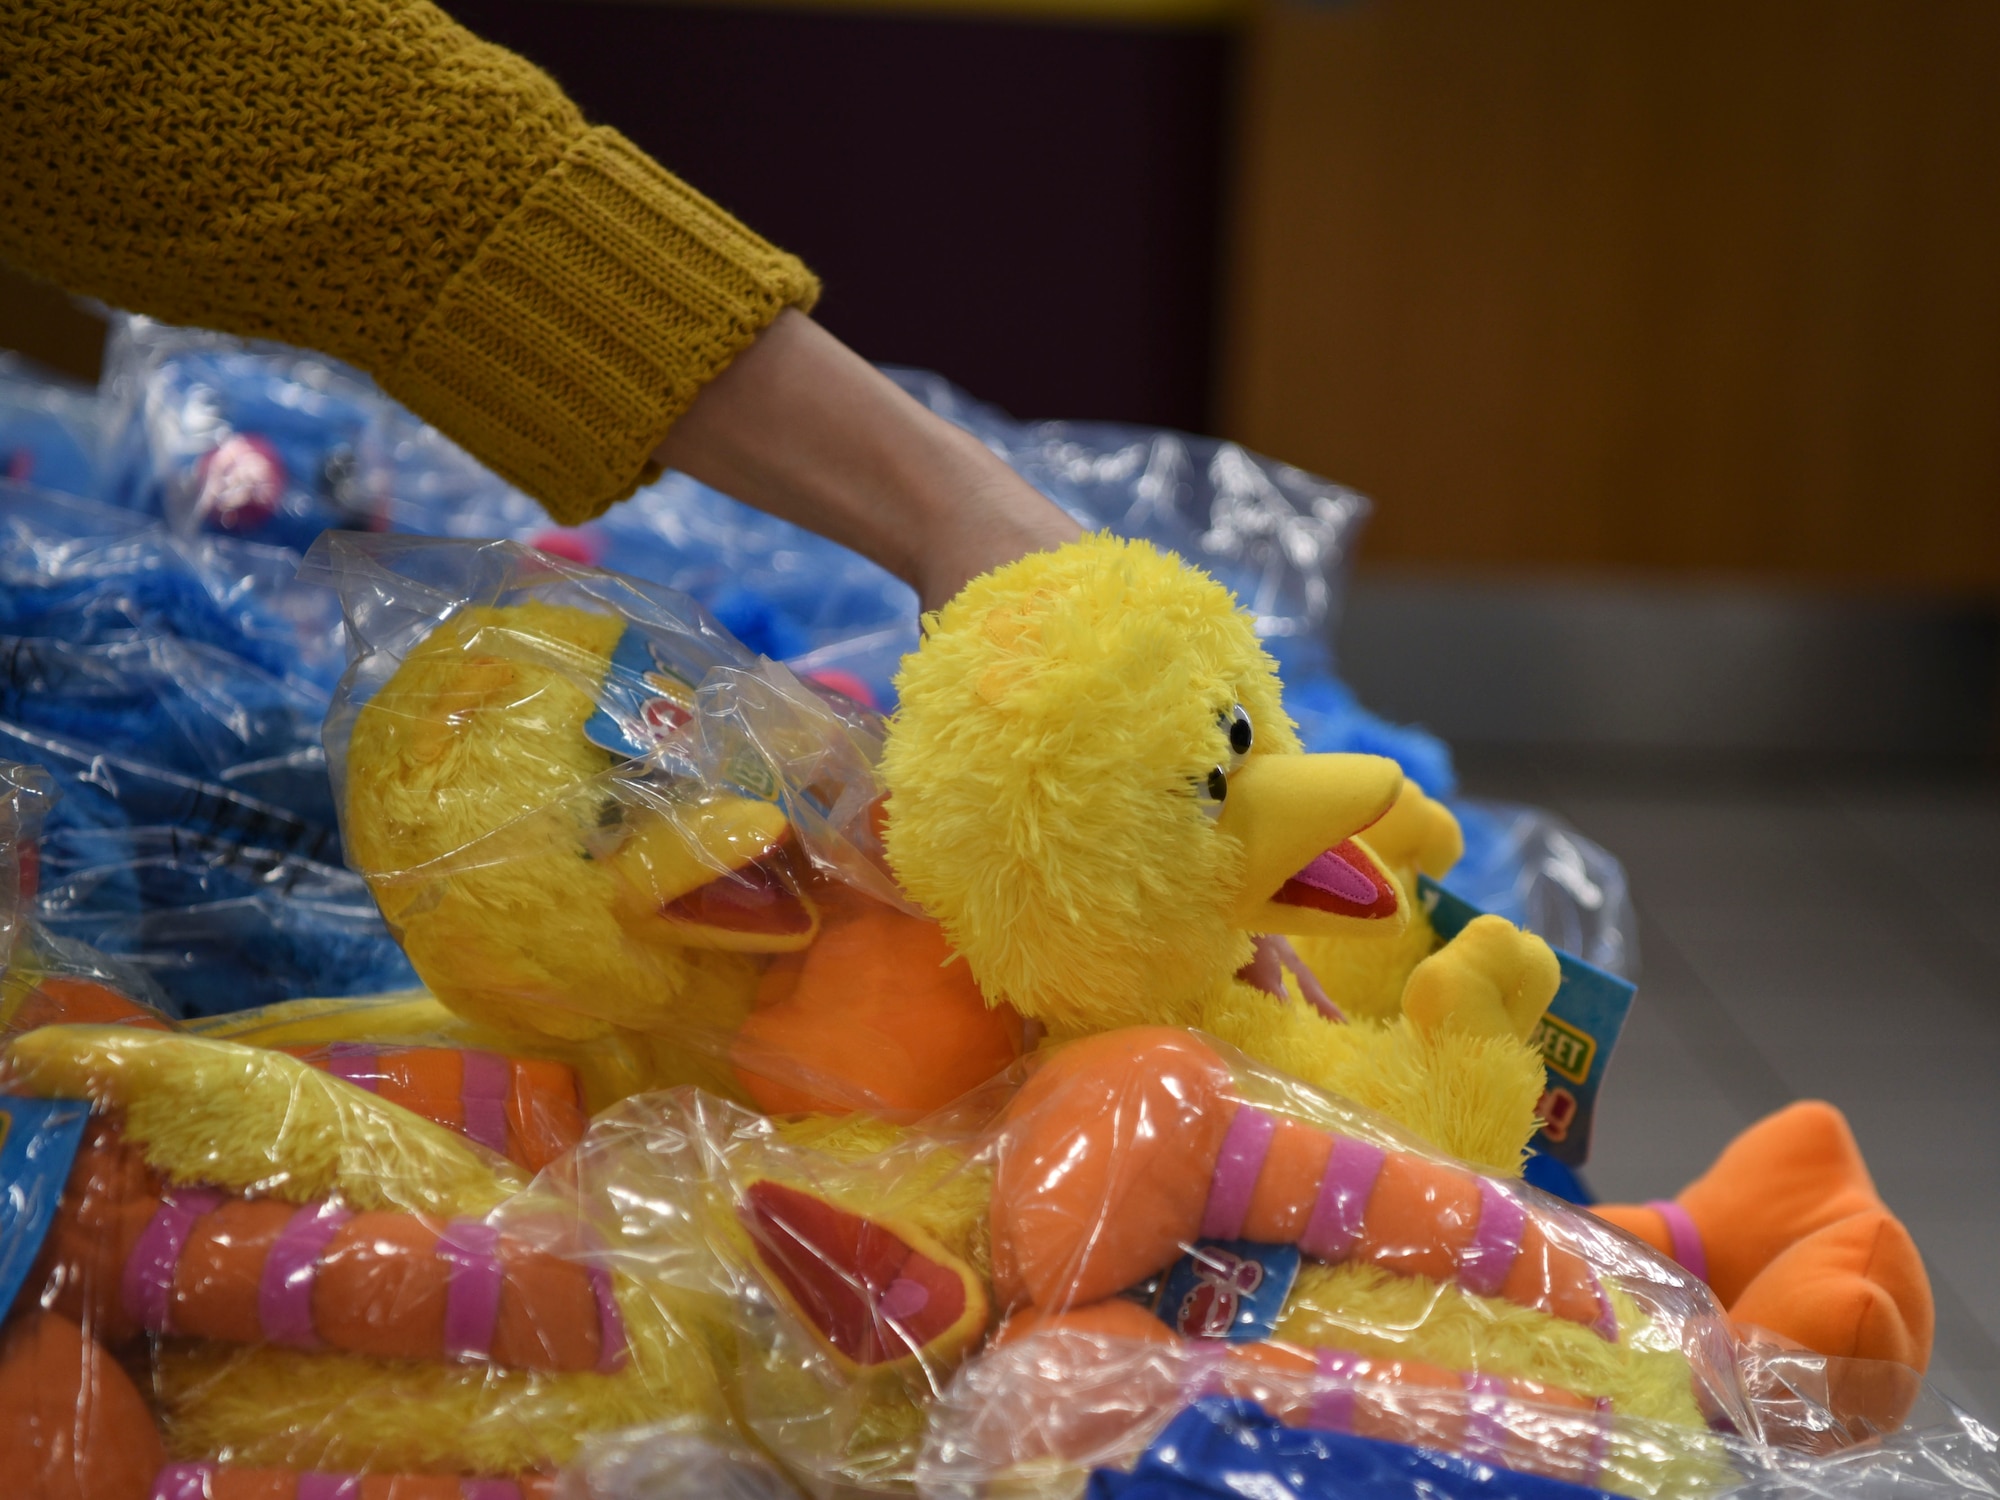 Volunteers and staff with the 319th Force Support Squadron assisted with the concession stands and souvenirs for the “Sesame Street Live” production March 26, 2019, on Grand Forks Air Force Base, North Dakota. The 319th Force Support Squadron helped set up concessions, which consisted of popcorn and soda, and the souvenirs were plush toys of the cast of “Sesame Street Live”. (U.S. Air Force photo by Airman 1st Class Melody Wolff)